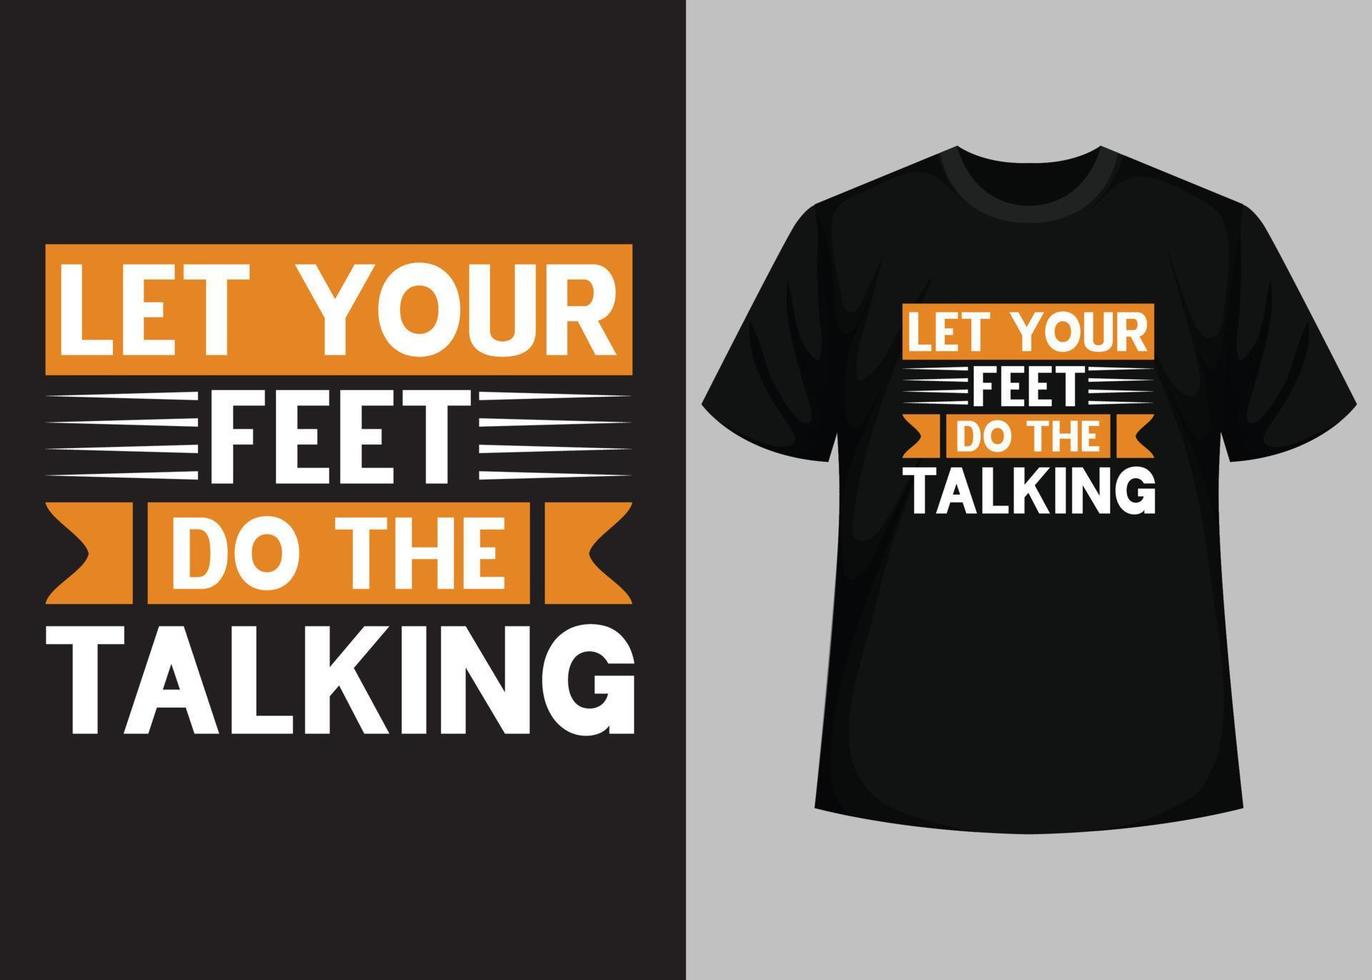 Let Your Feet Do The Talking T shirt Design. Best Happy Football Day T Shirt Design. T-shirt Design, Typography T Shirt, Vector and Illustration Elements for a Printable Products.